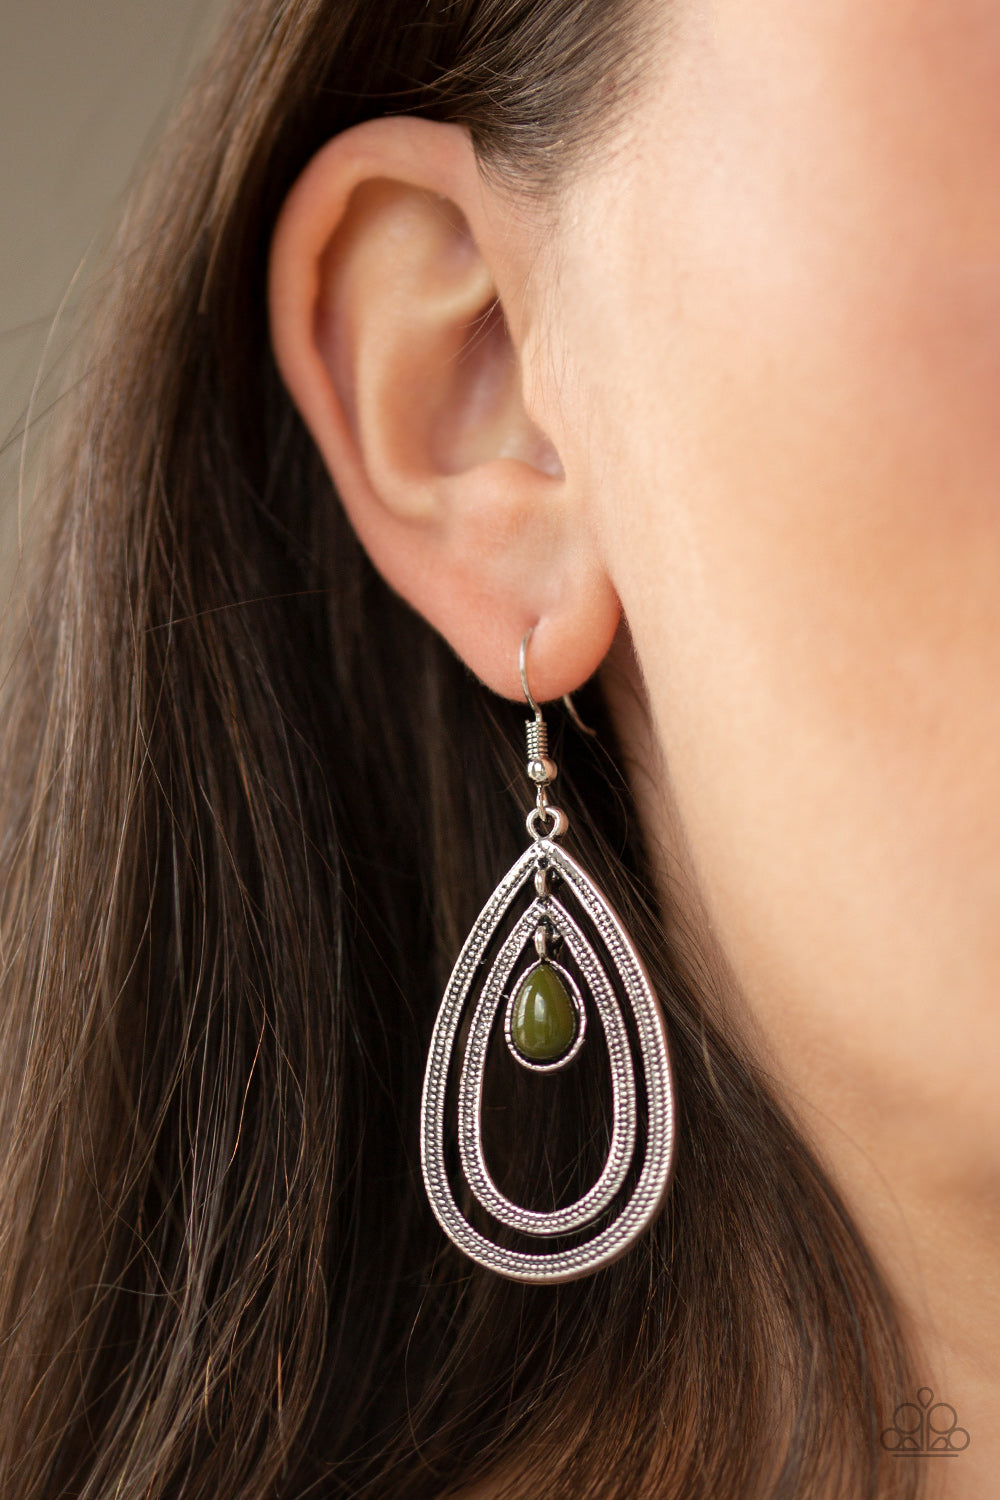 Paparazzi Earrings - Drops of Color - Green